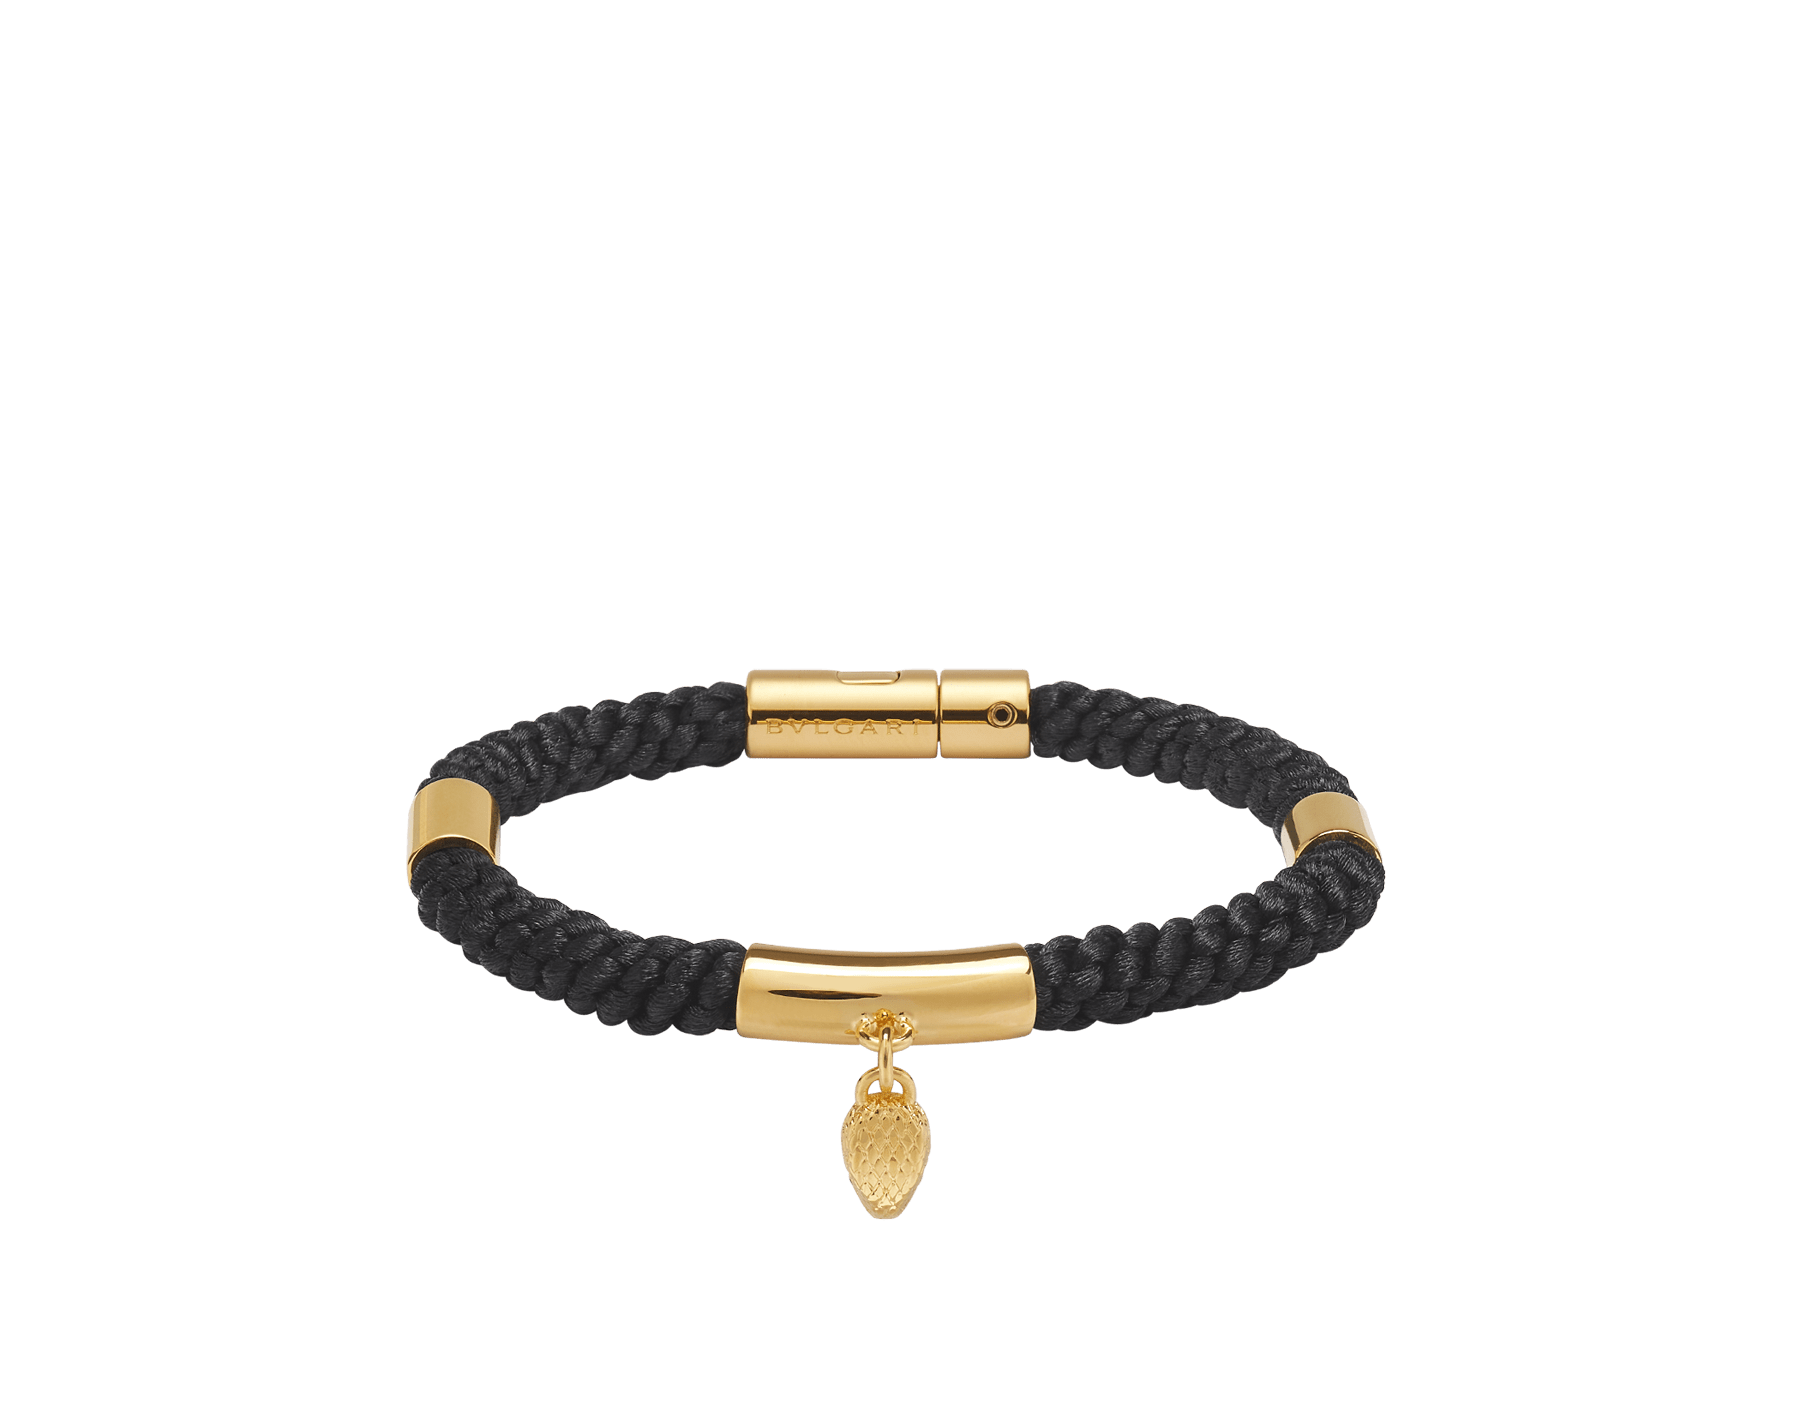 Serpenti Forever bracelet in black woven fabric. Captivating snakehead charm in gold-plated brass embellished with red enamel eyes, and press-button closure. SERPMULTISTRING-WF-B image 1